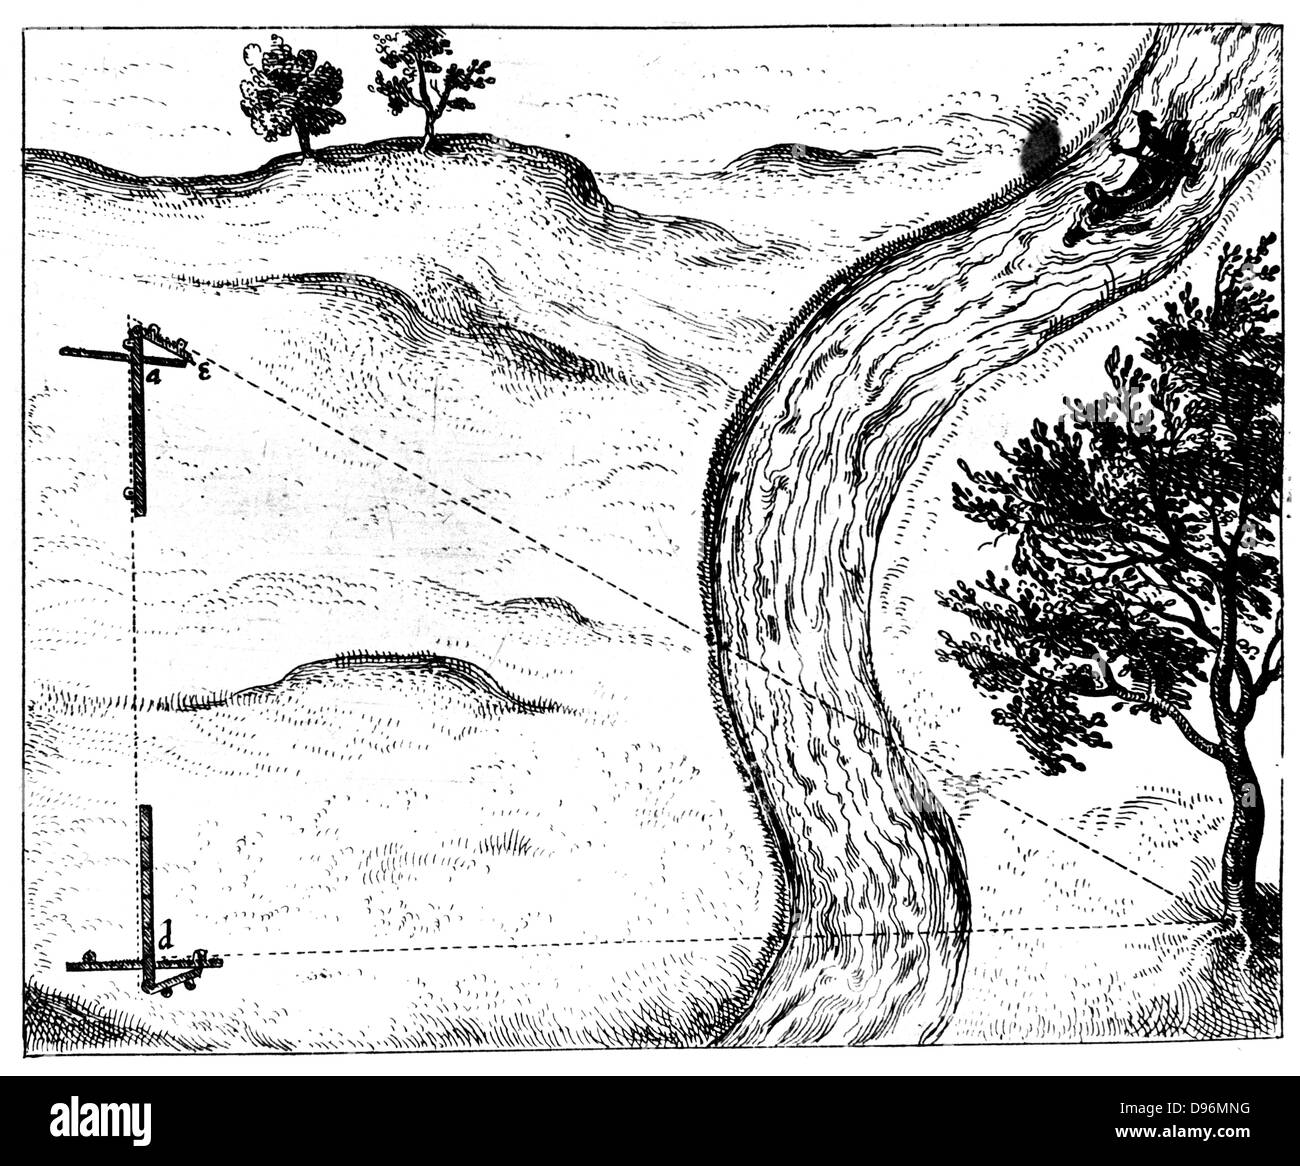 Measuring the distance of an inaccessible object by triangulation using a hinged staff. From Robert Fludd 'Utriusque cosmi ... historia', Oppenheim, 1617-1619. Engraving Stock Photo